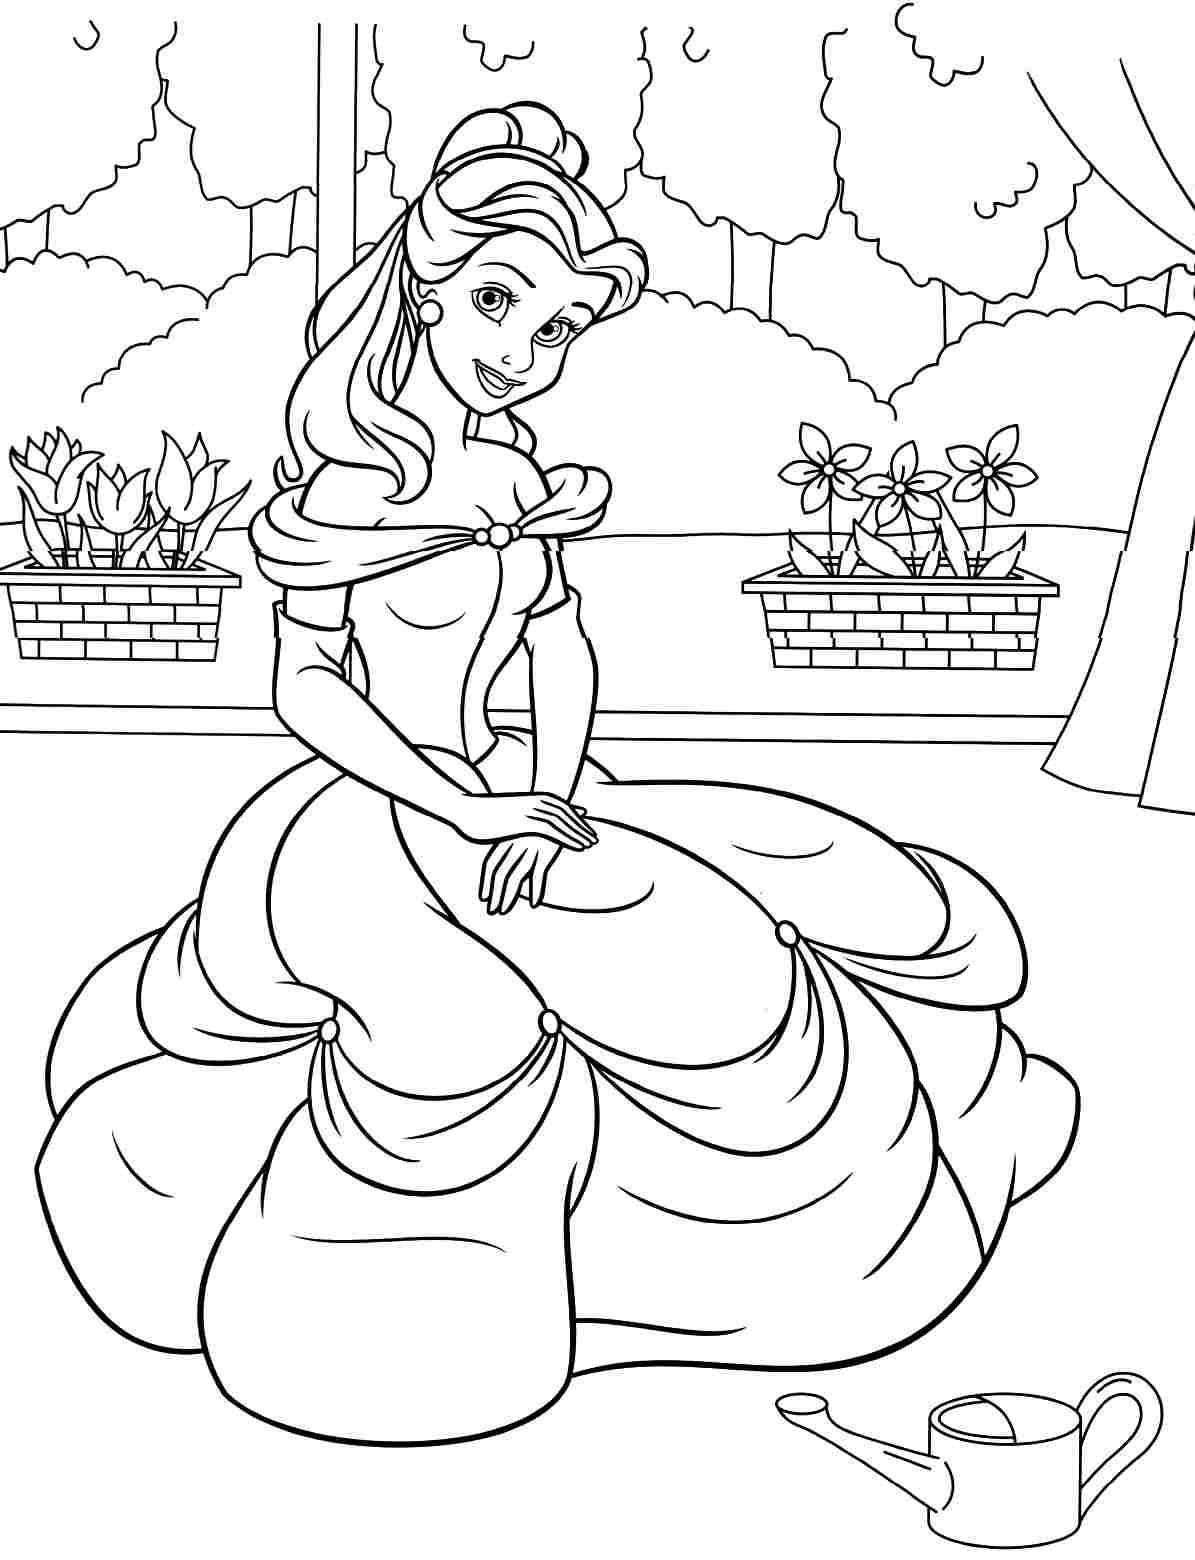 Printable Coloring Pages Free Disney